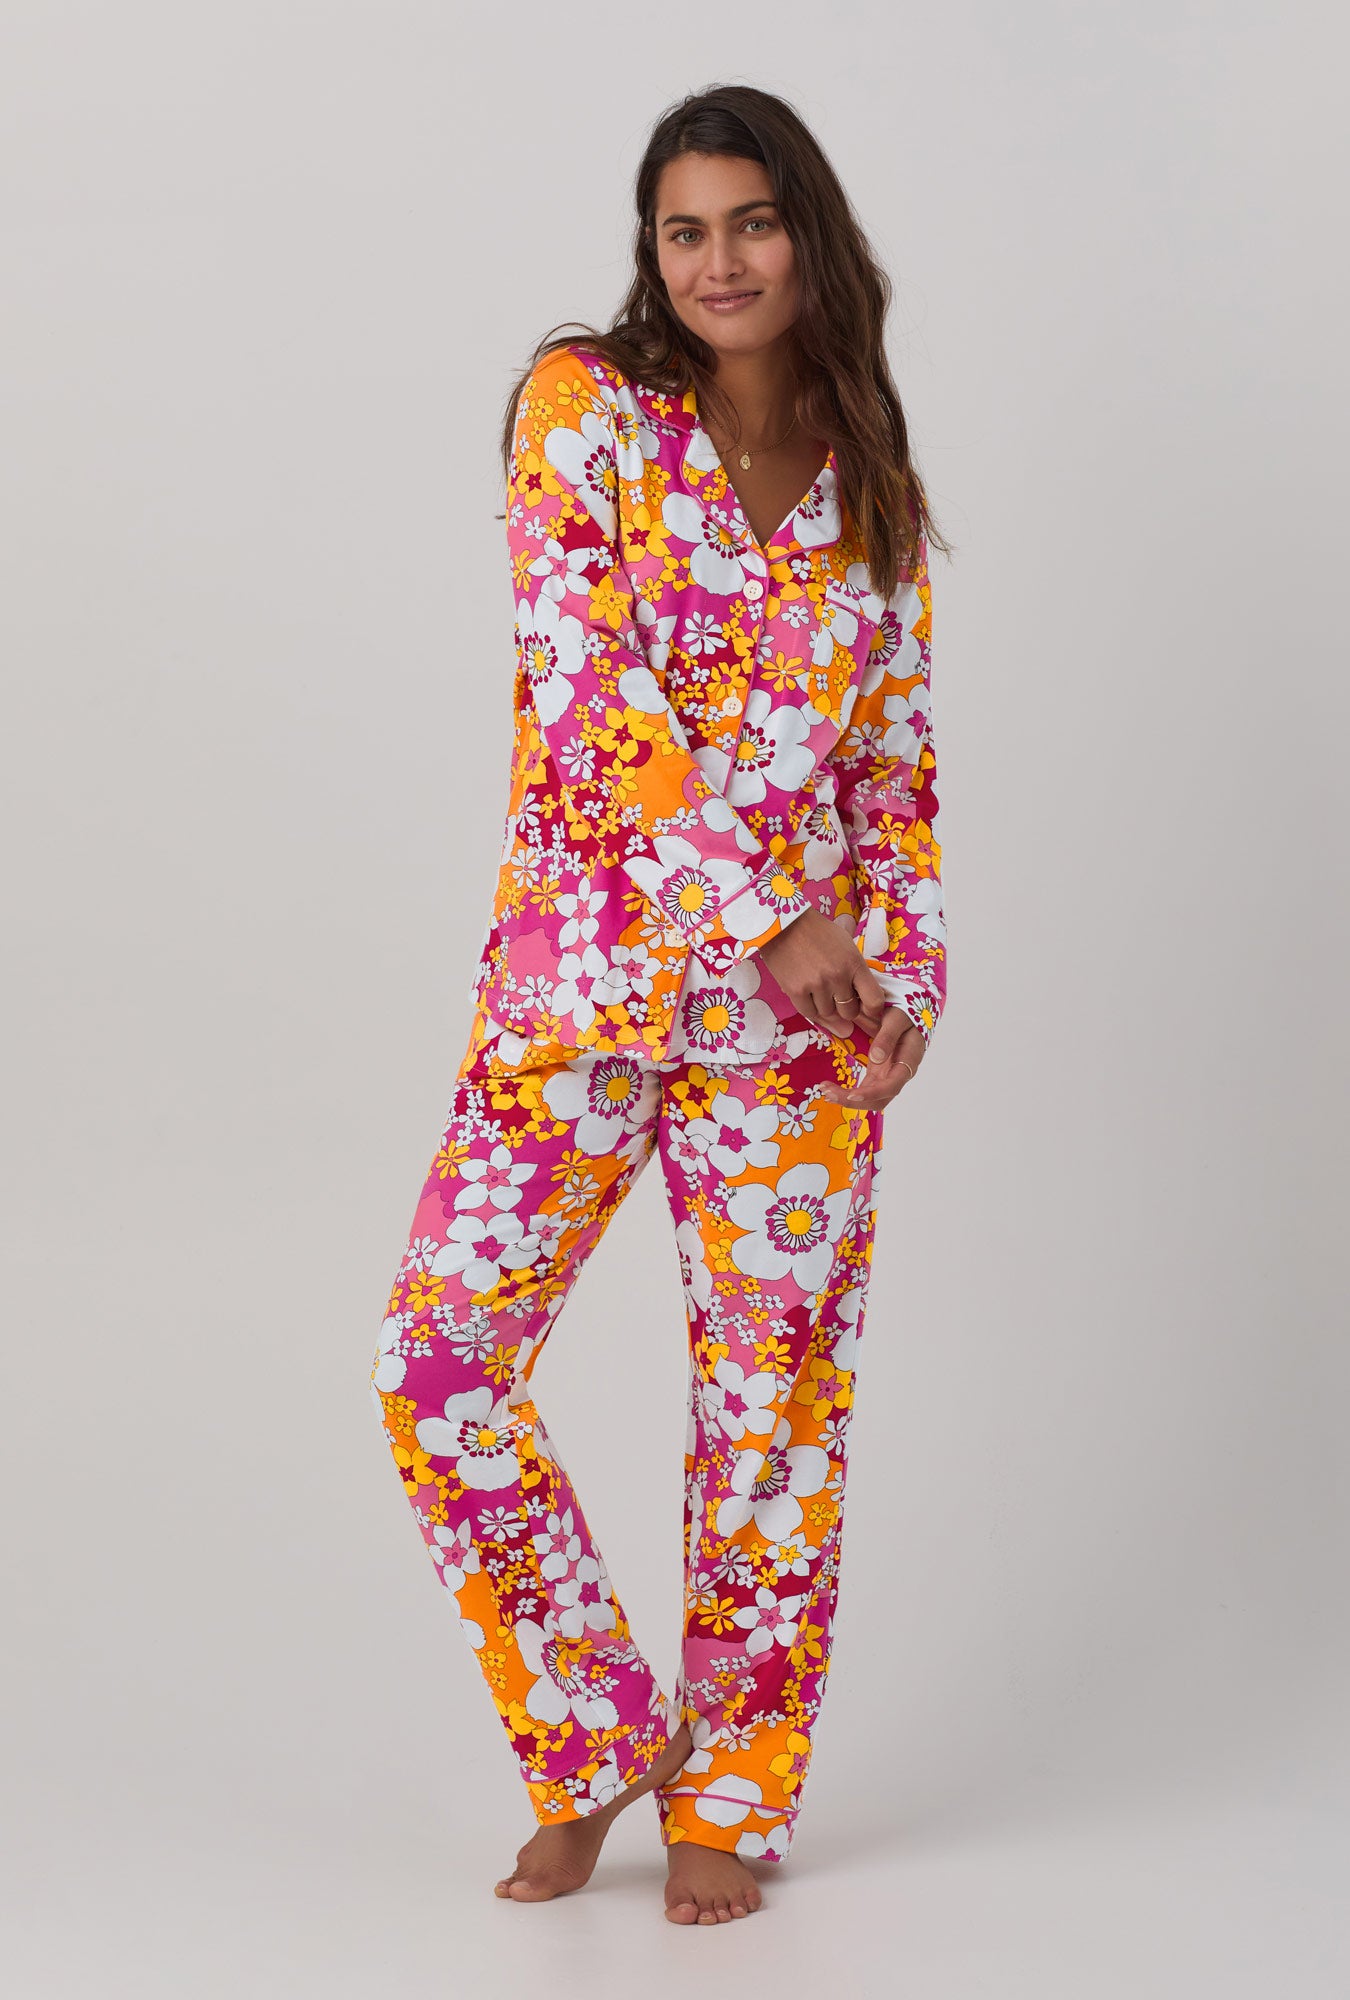 A lady wearing long sleeve classic stretch jersey pj set with bali pink floral print